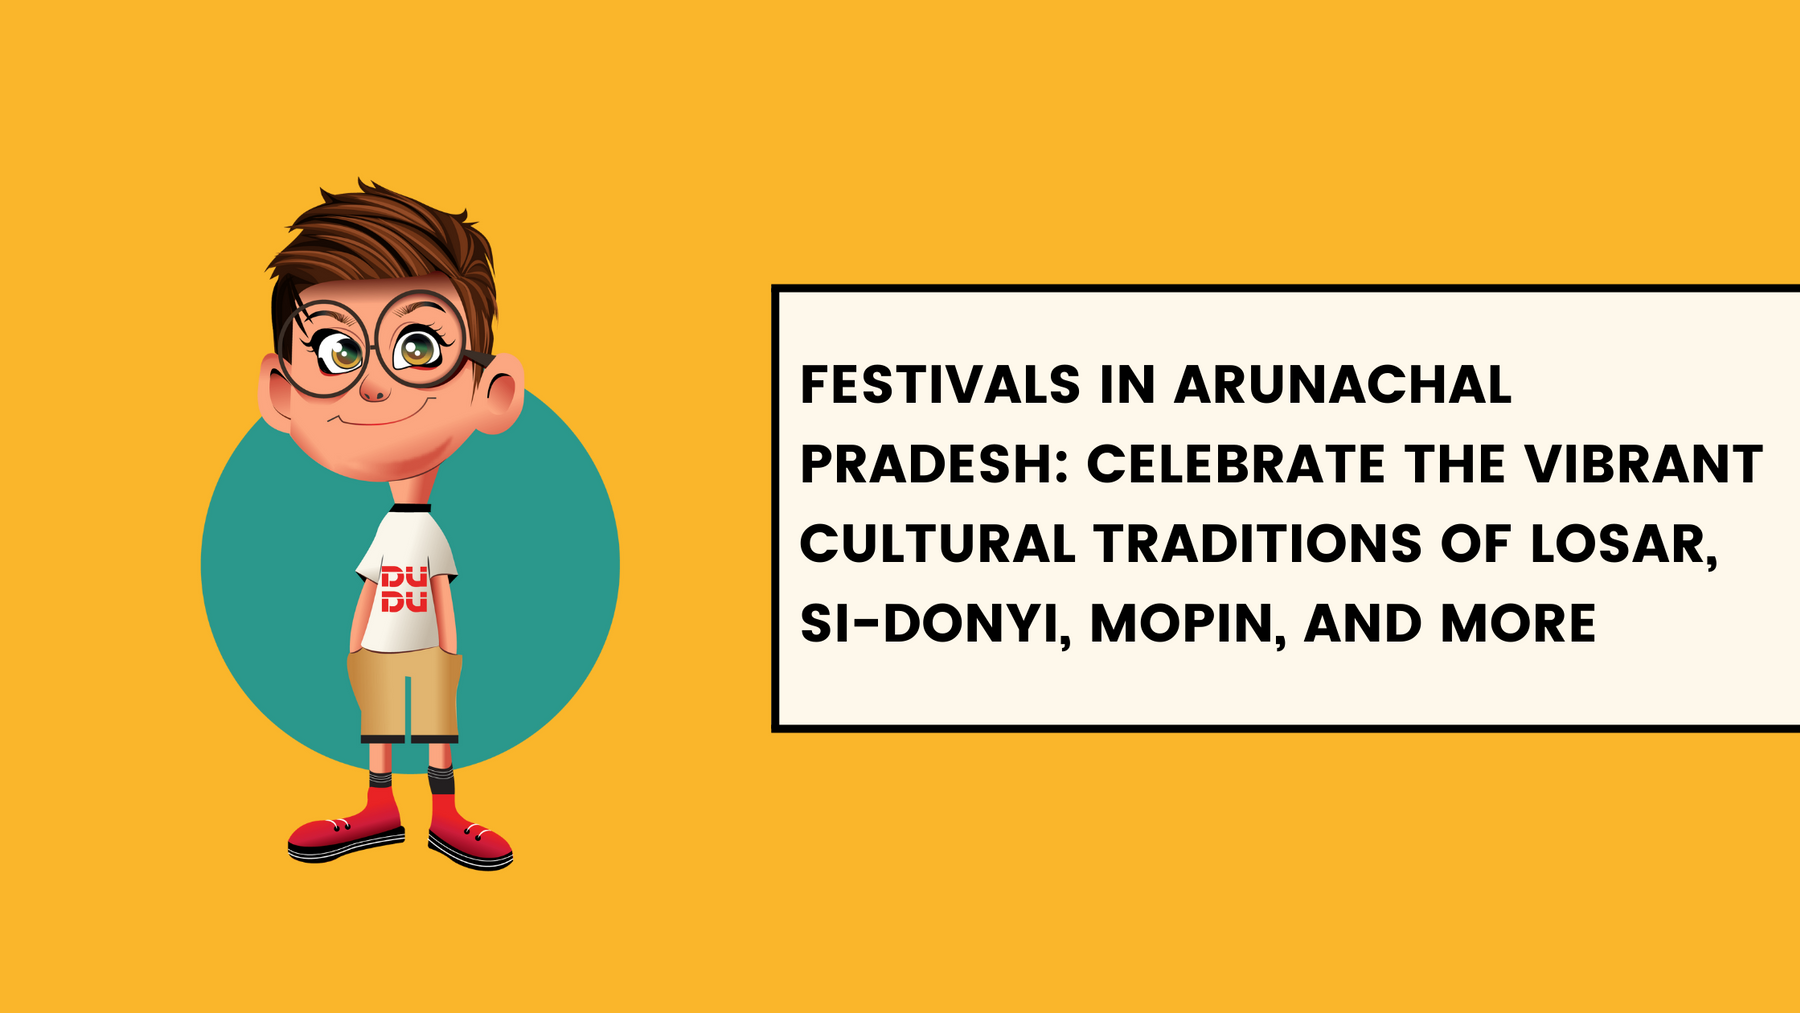 Festivals In Arunachal Pradesh: Celebrate The Vibrant Cultural Traditions Of Losar, Si-Donyi, Mopin, And More